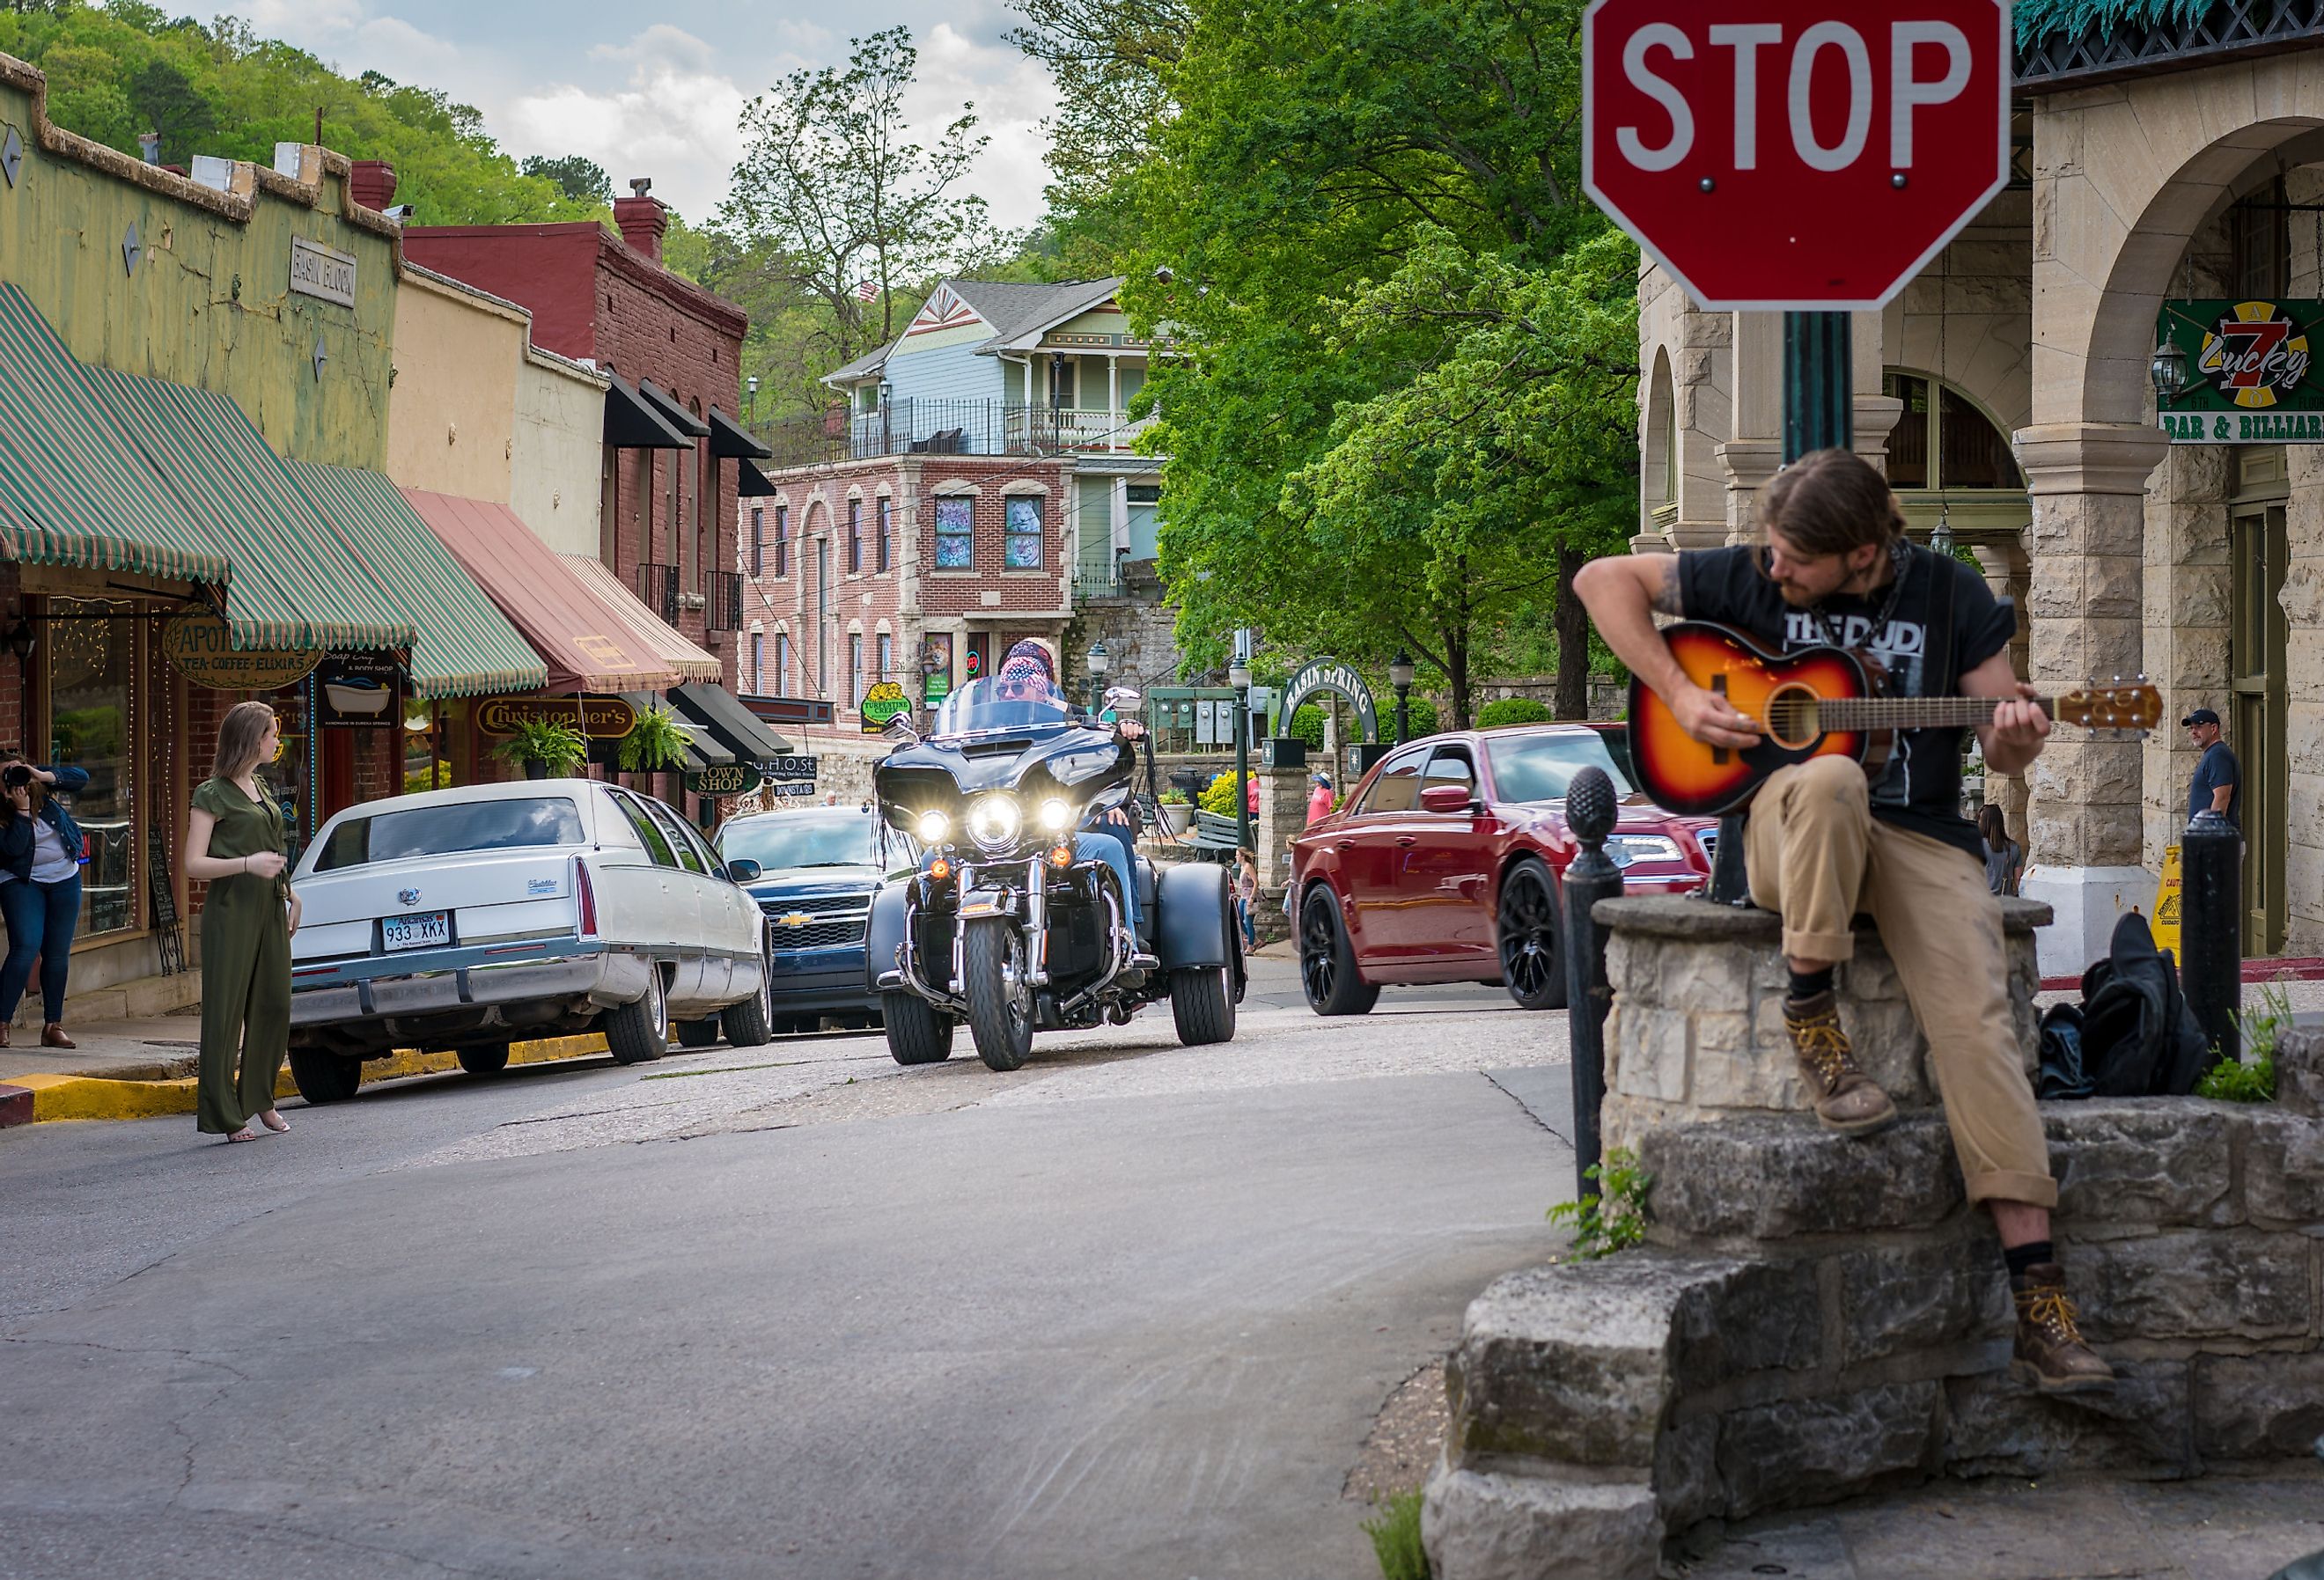 Man playing guitar at a stop sign, and cars and people on the street in downtown Eureka Springs, Arkansas. Image credit shuttersv via Shutterstock